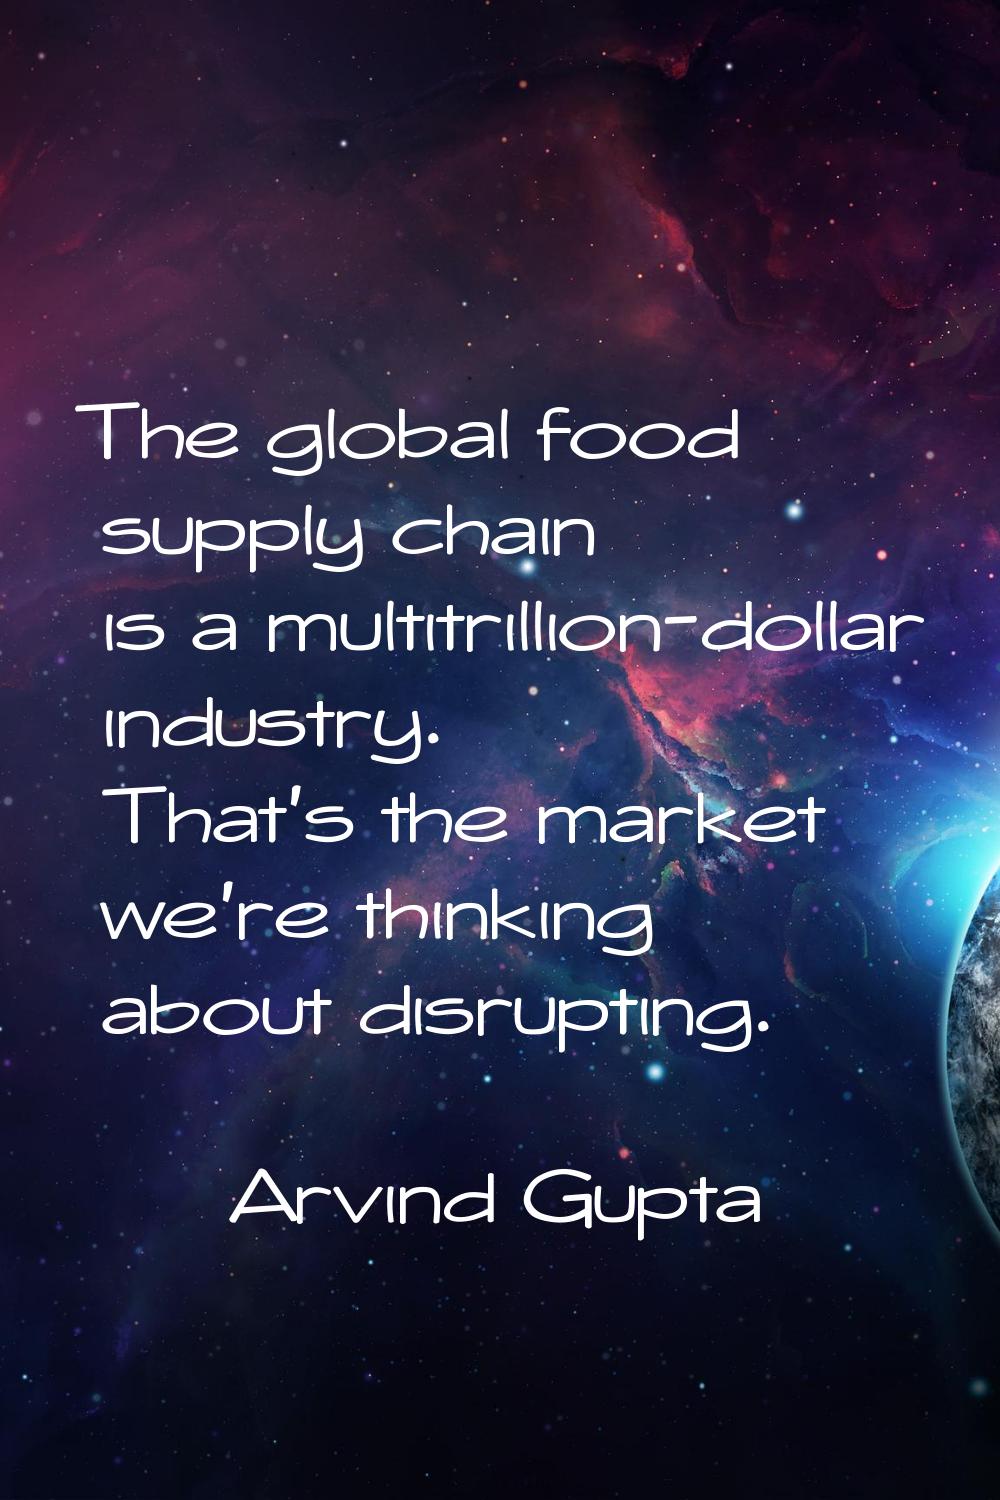 The global food supply chain is a multitrillion-dollar industry. That's the market we're thinking a